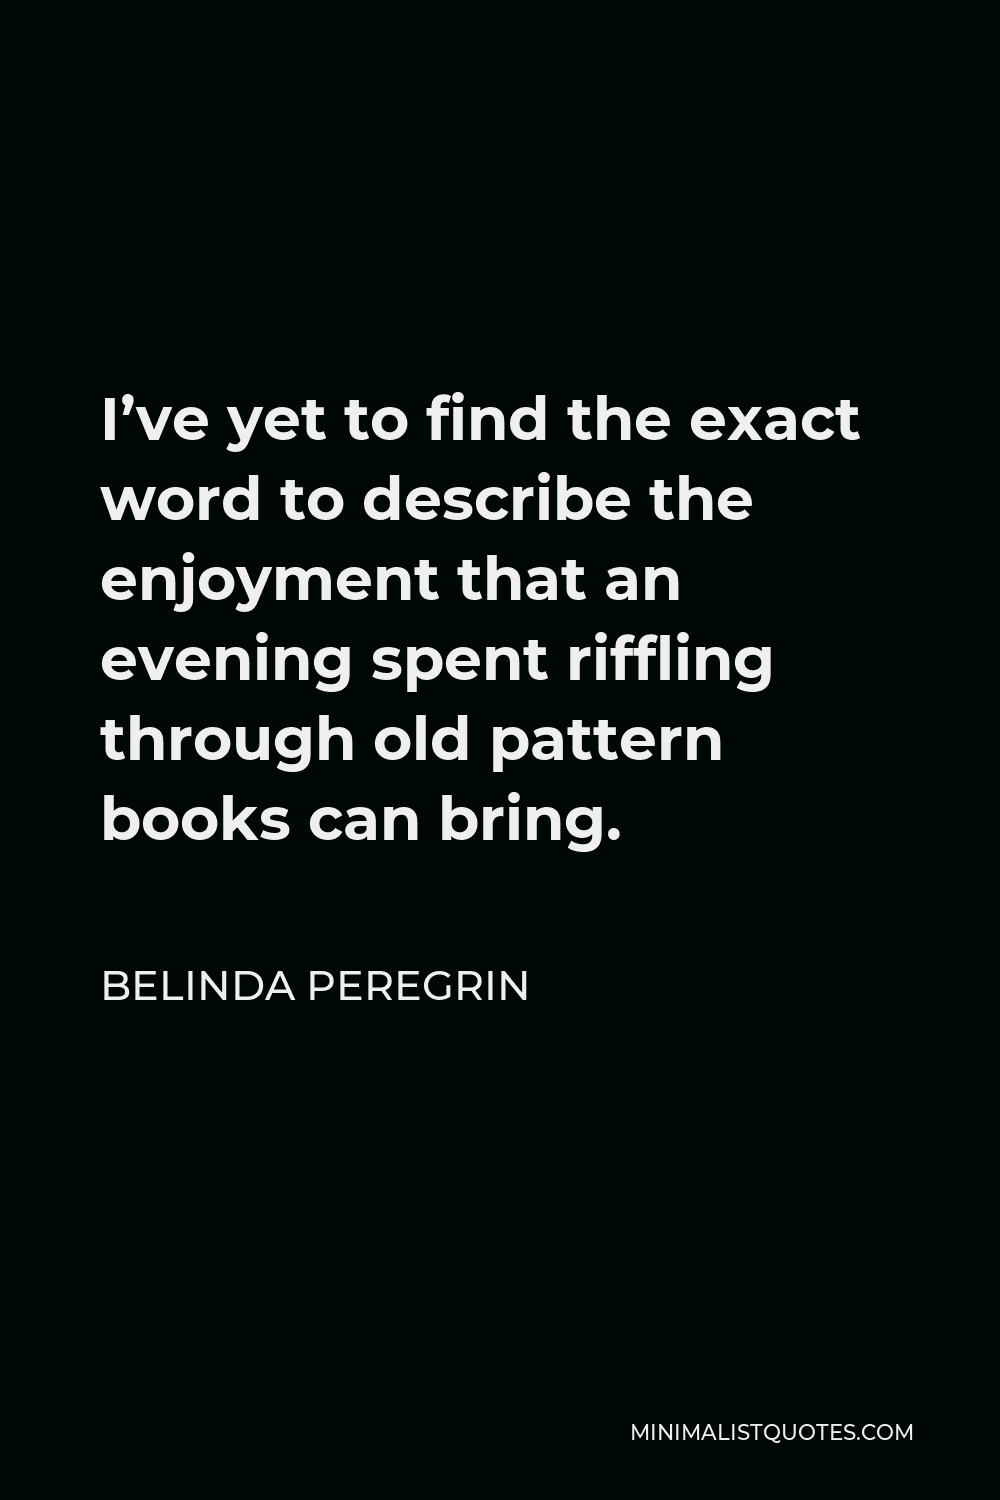 Belinda Peregrin Quote - I’ve yet to find the exact word to describe the enjoyment that an evening spent riffling through old pattern books can bring.